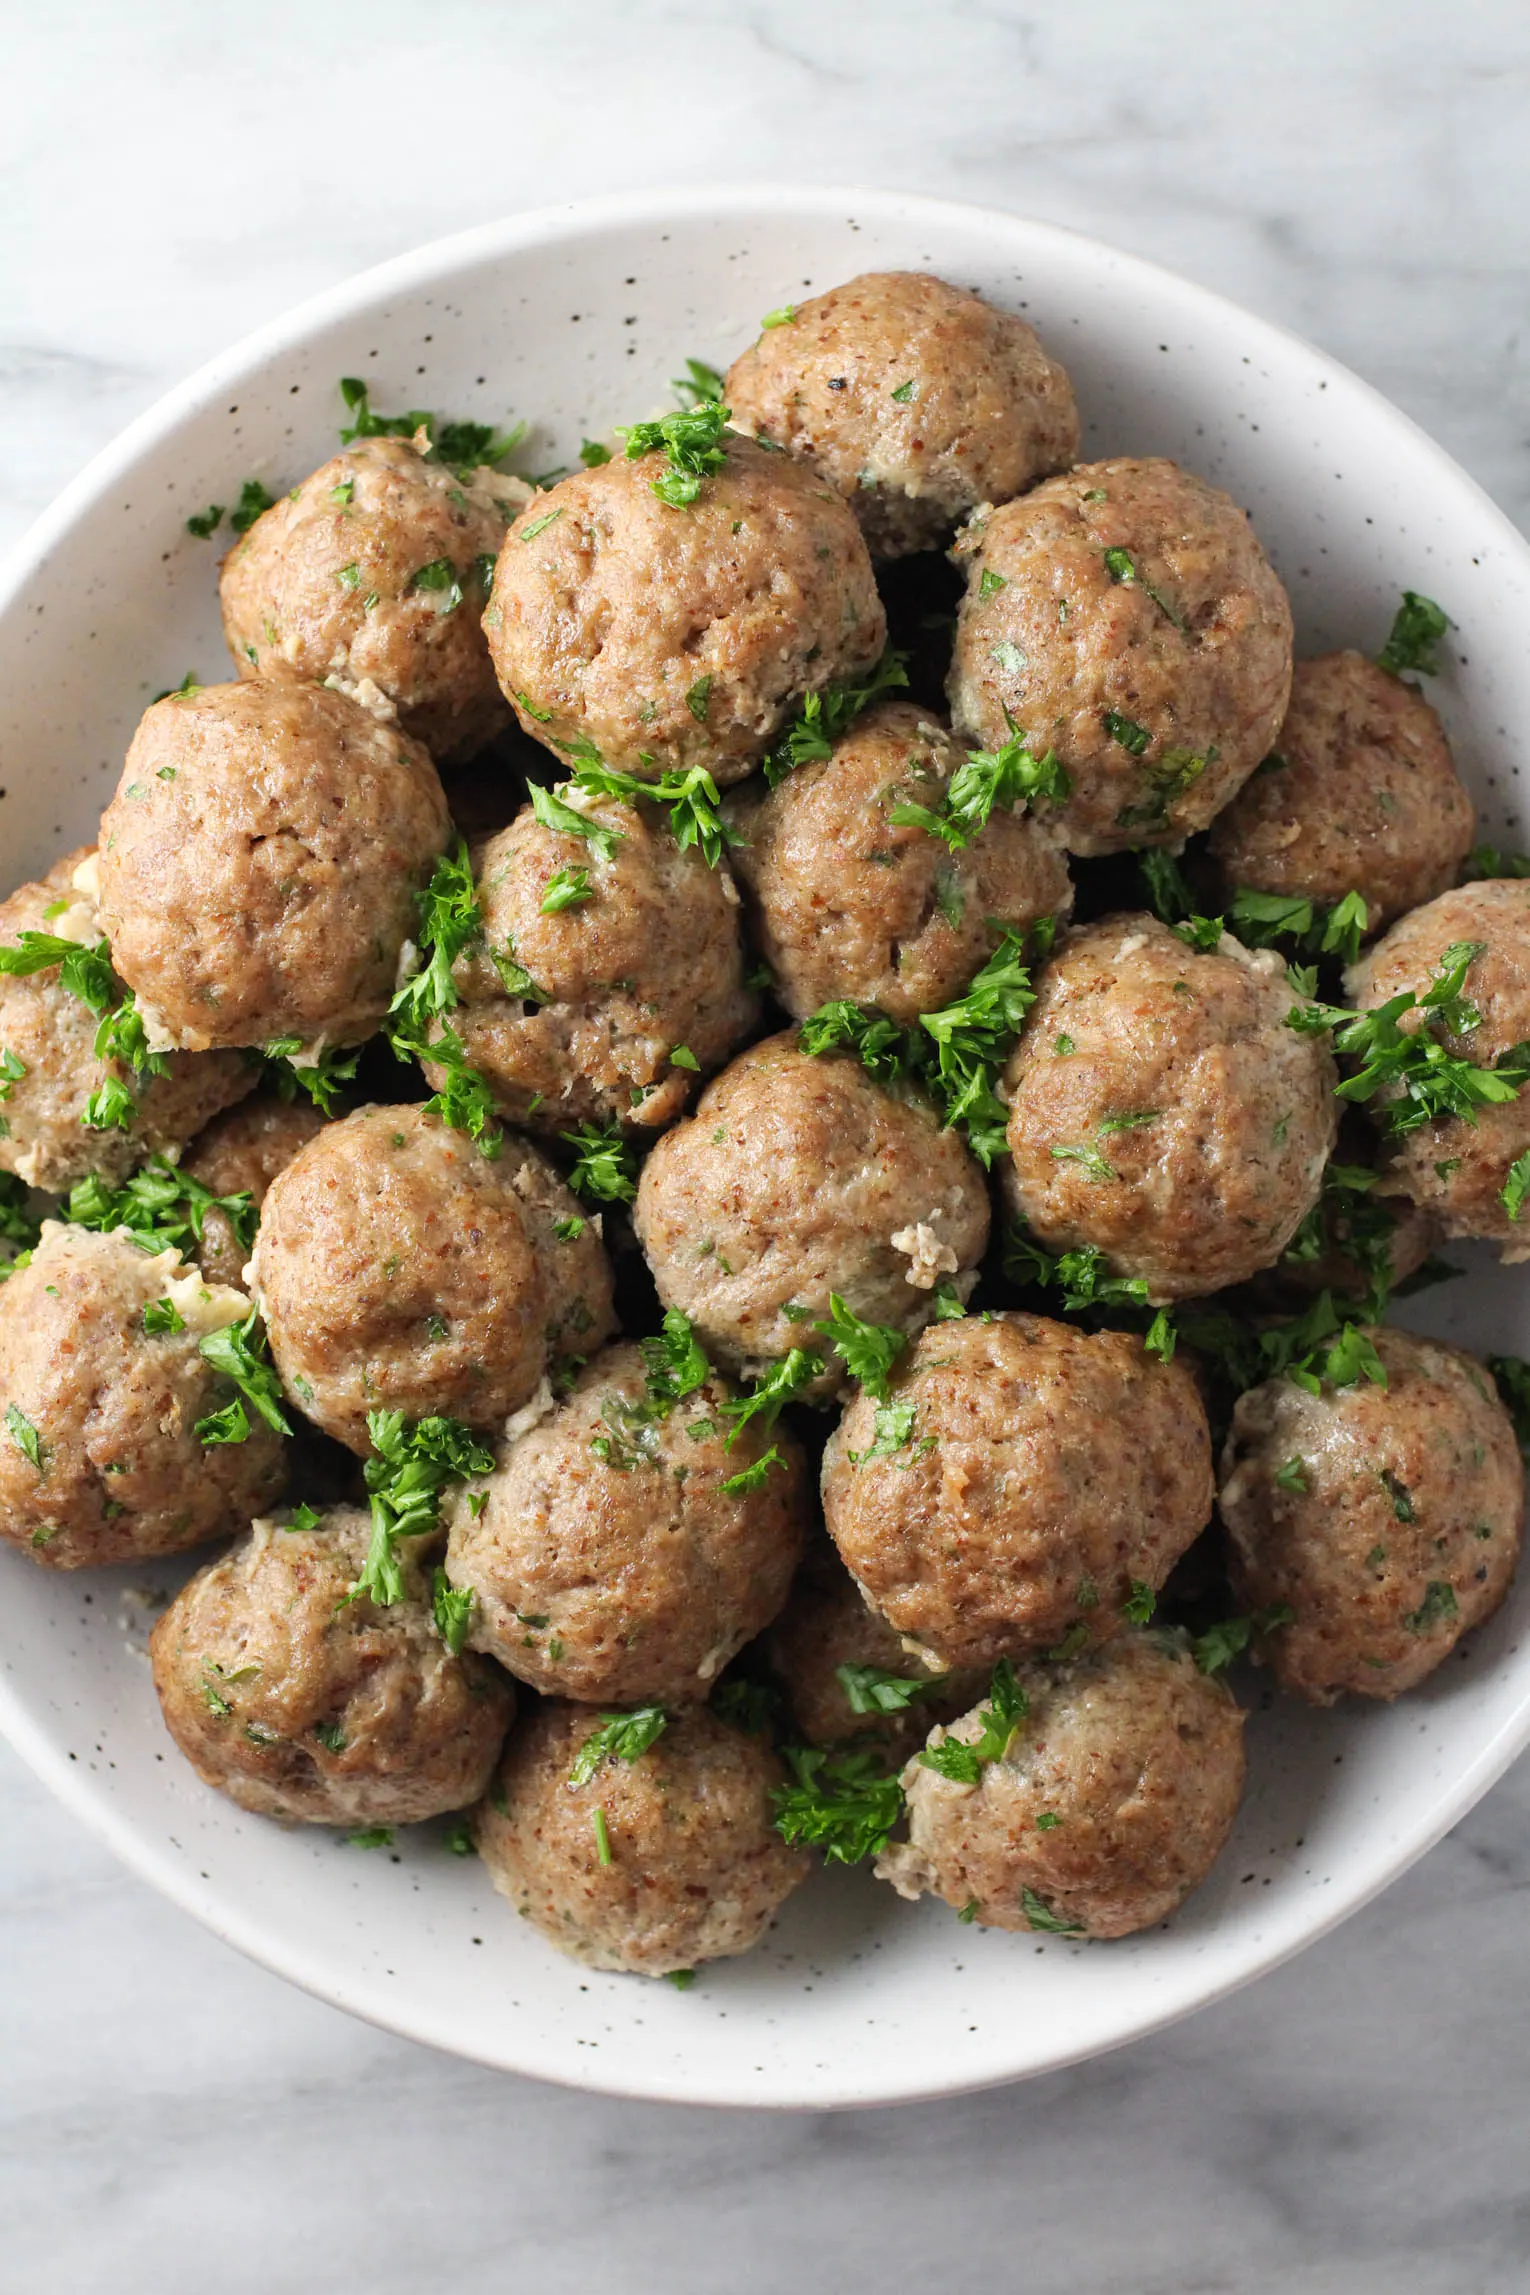 Overhead shot of meatballs without breadcrumbs in a bowl. The meatballs are garnished with parsley.